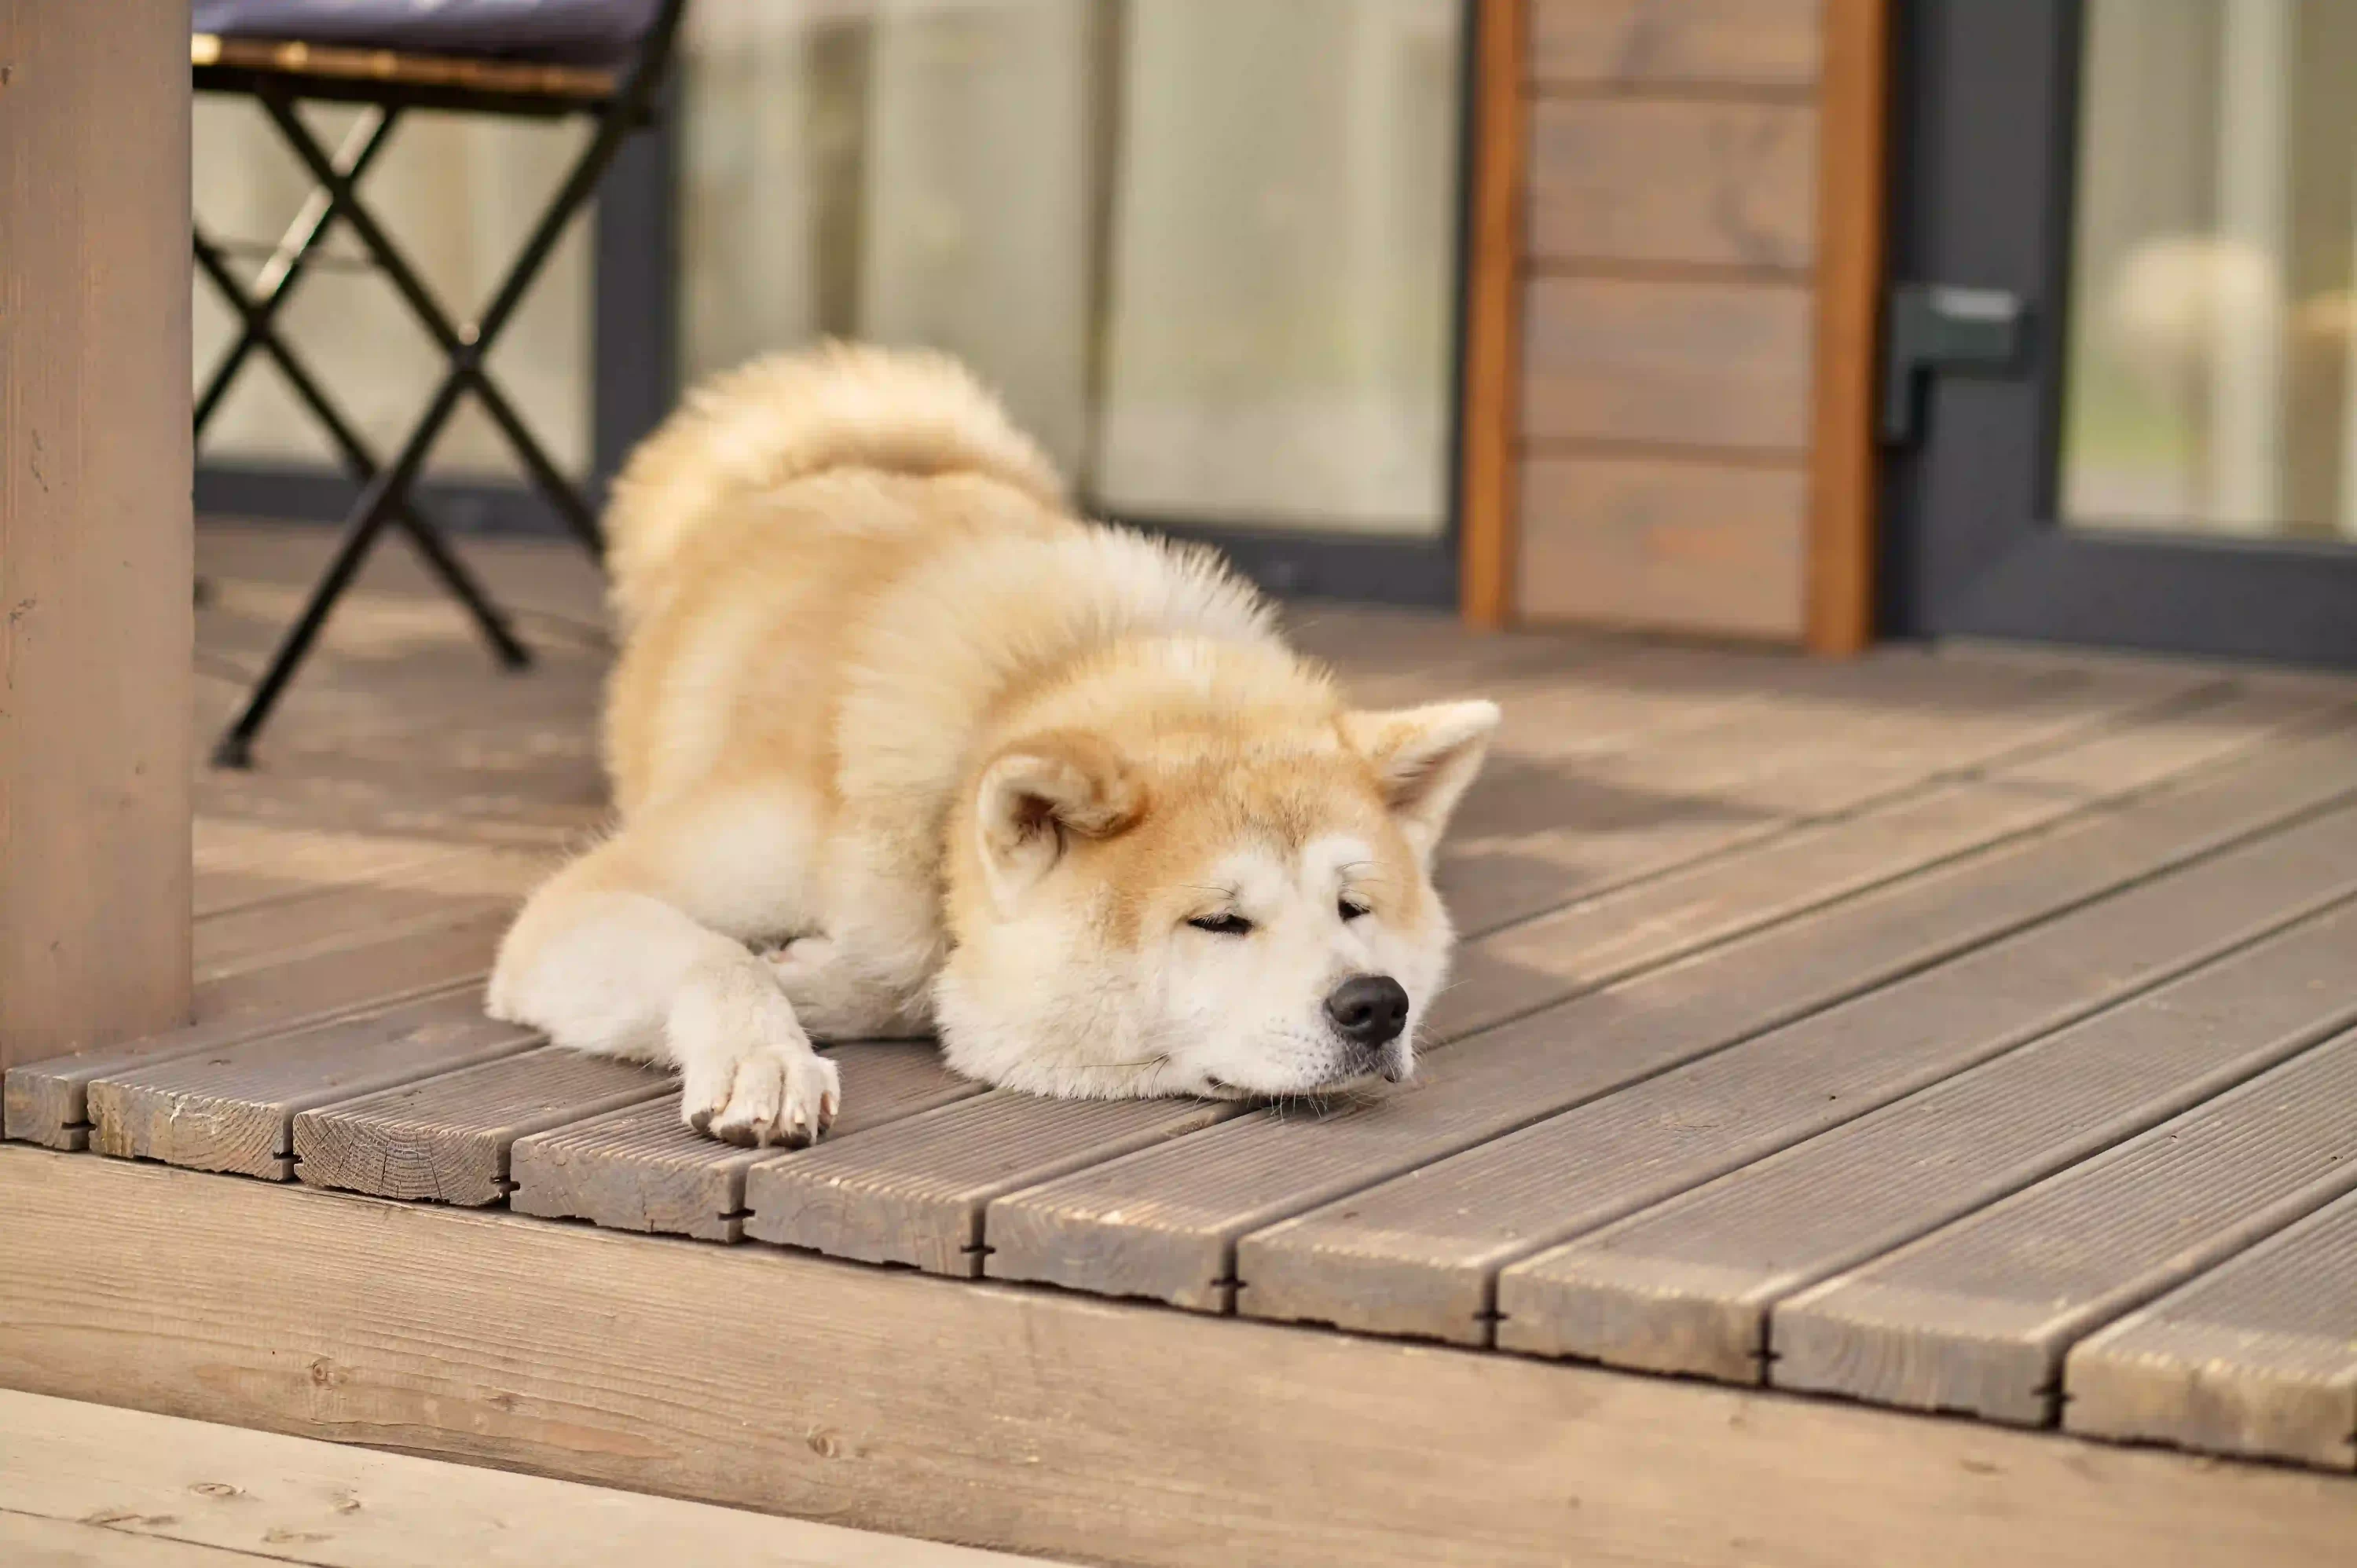 Dog having a nap outside. Preparing your pet for gathering